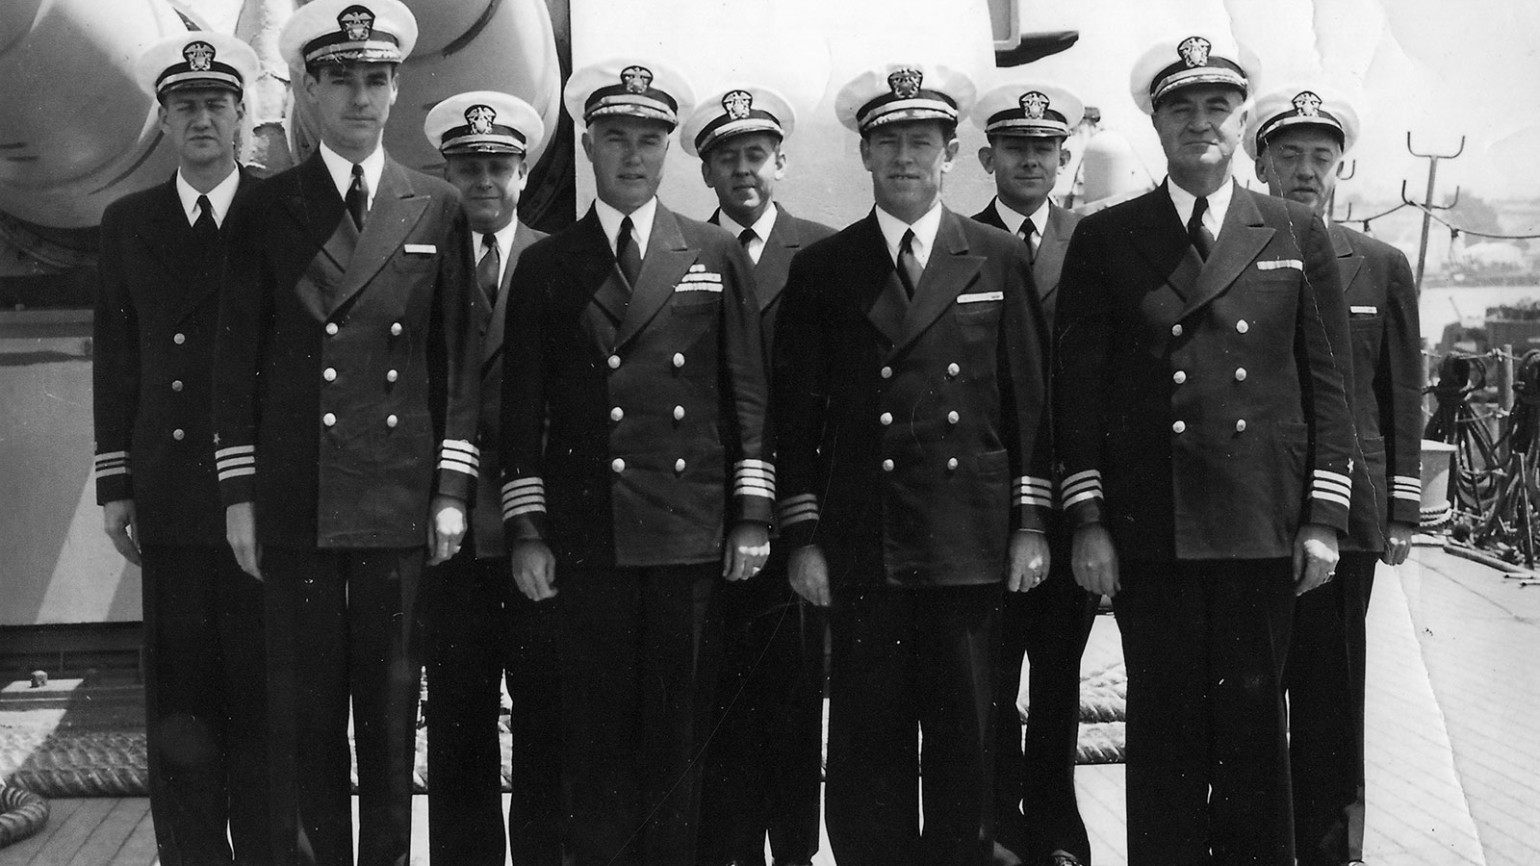 Captains in formation atop USS Indianapolis. Photo courtesy of Alfred J. Sedivi Collection - USNI.